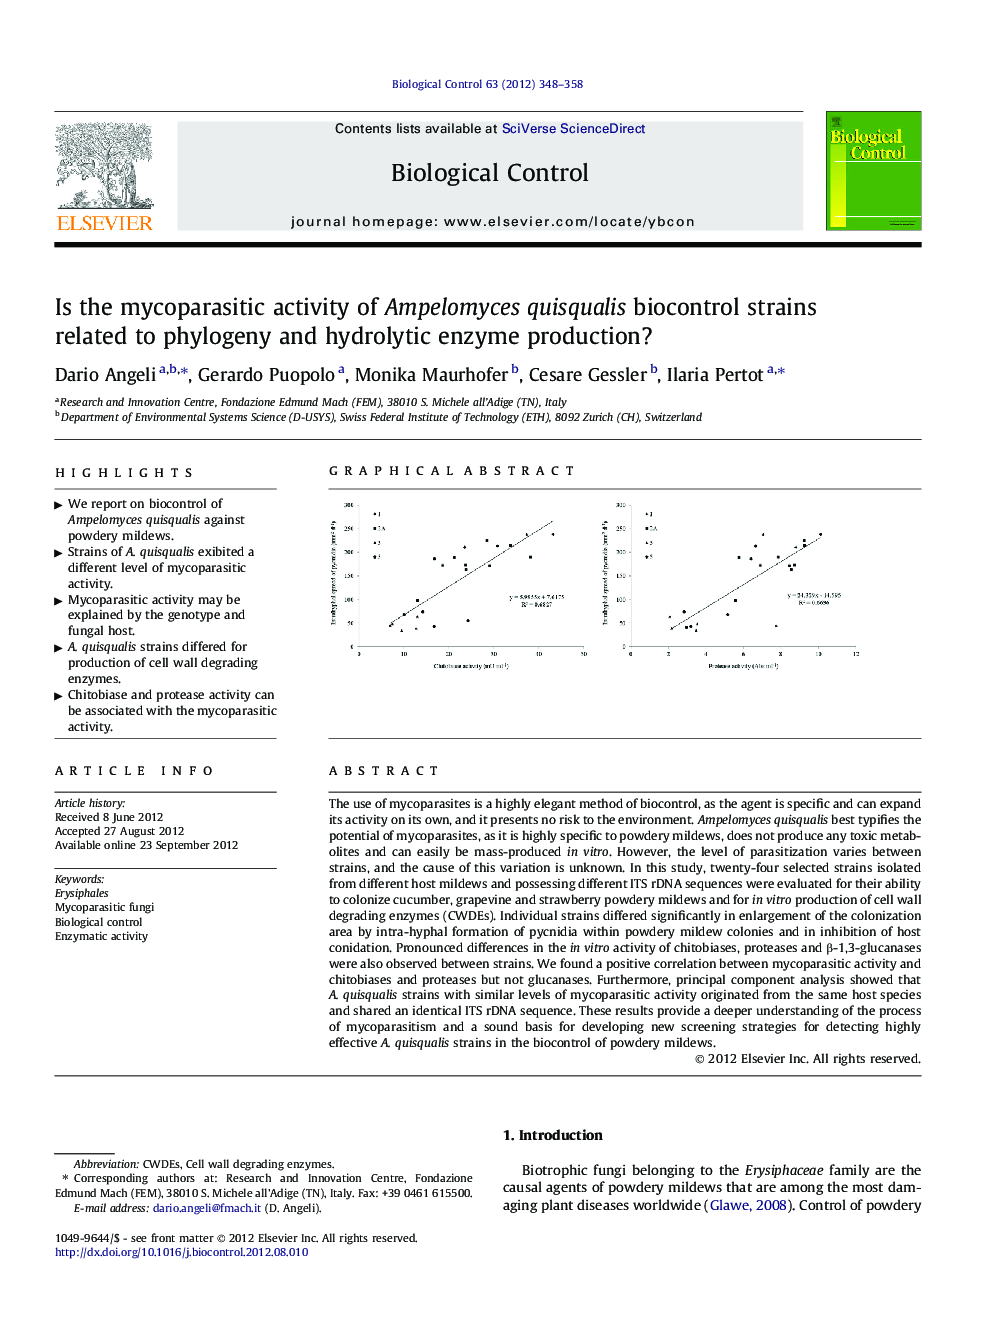 Is the mycoparasitic activity of Ampelomyces quisqualis biocontrol strains related to phylogeny and hydrolytic enzyme production?